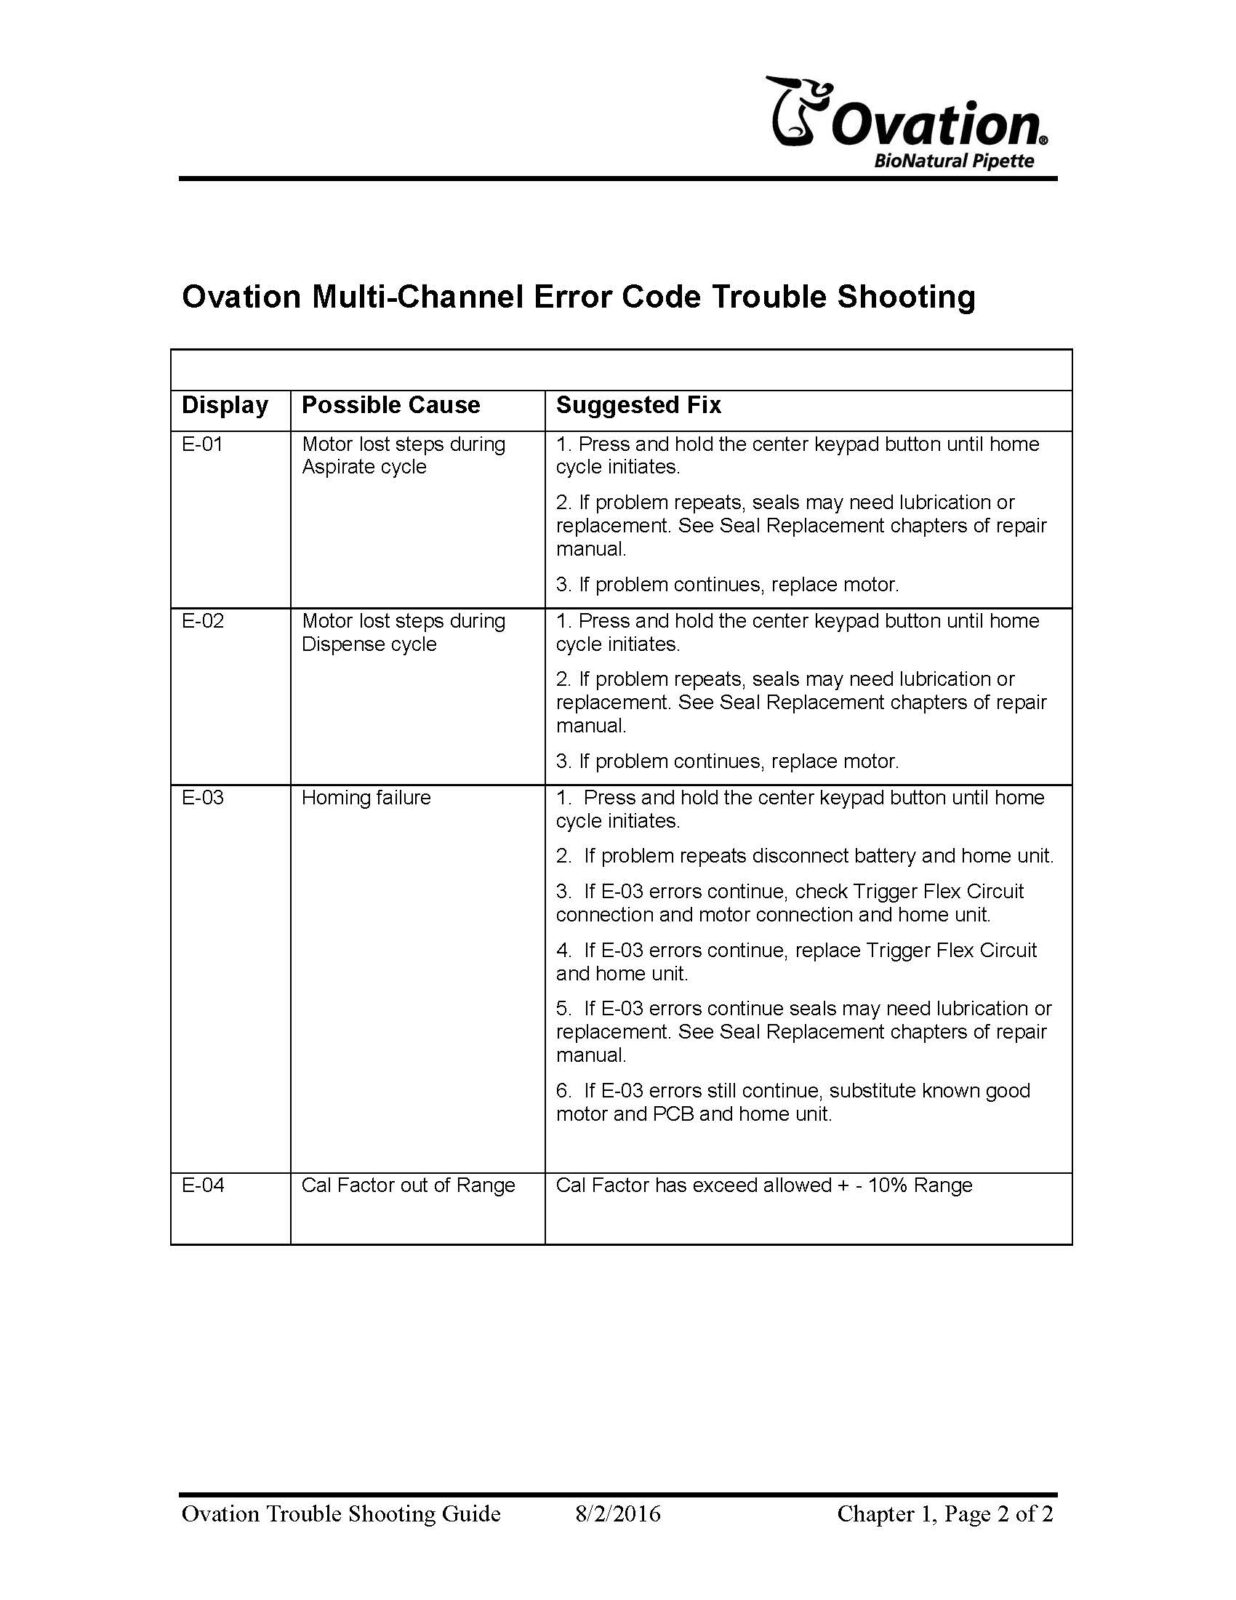 Trouble Shooting Guide RevD_Page_2